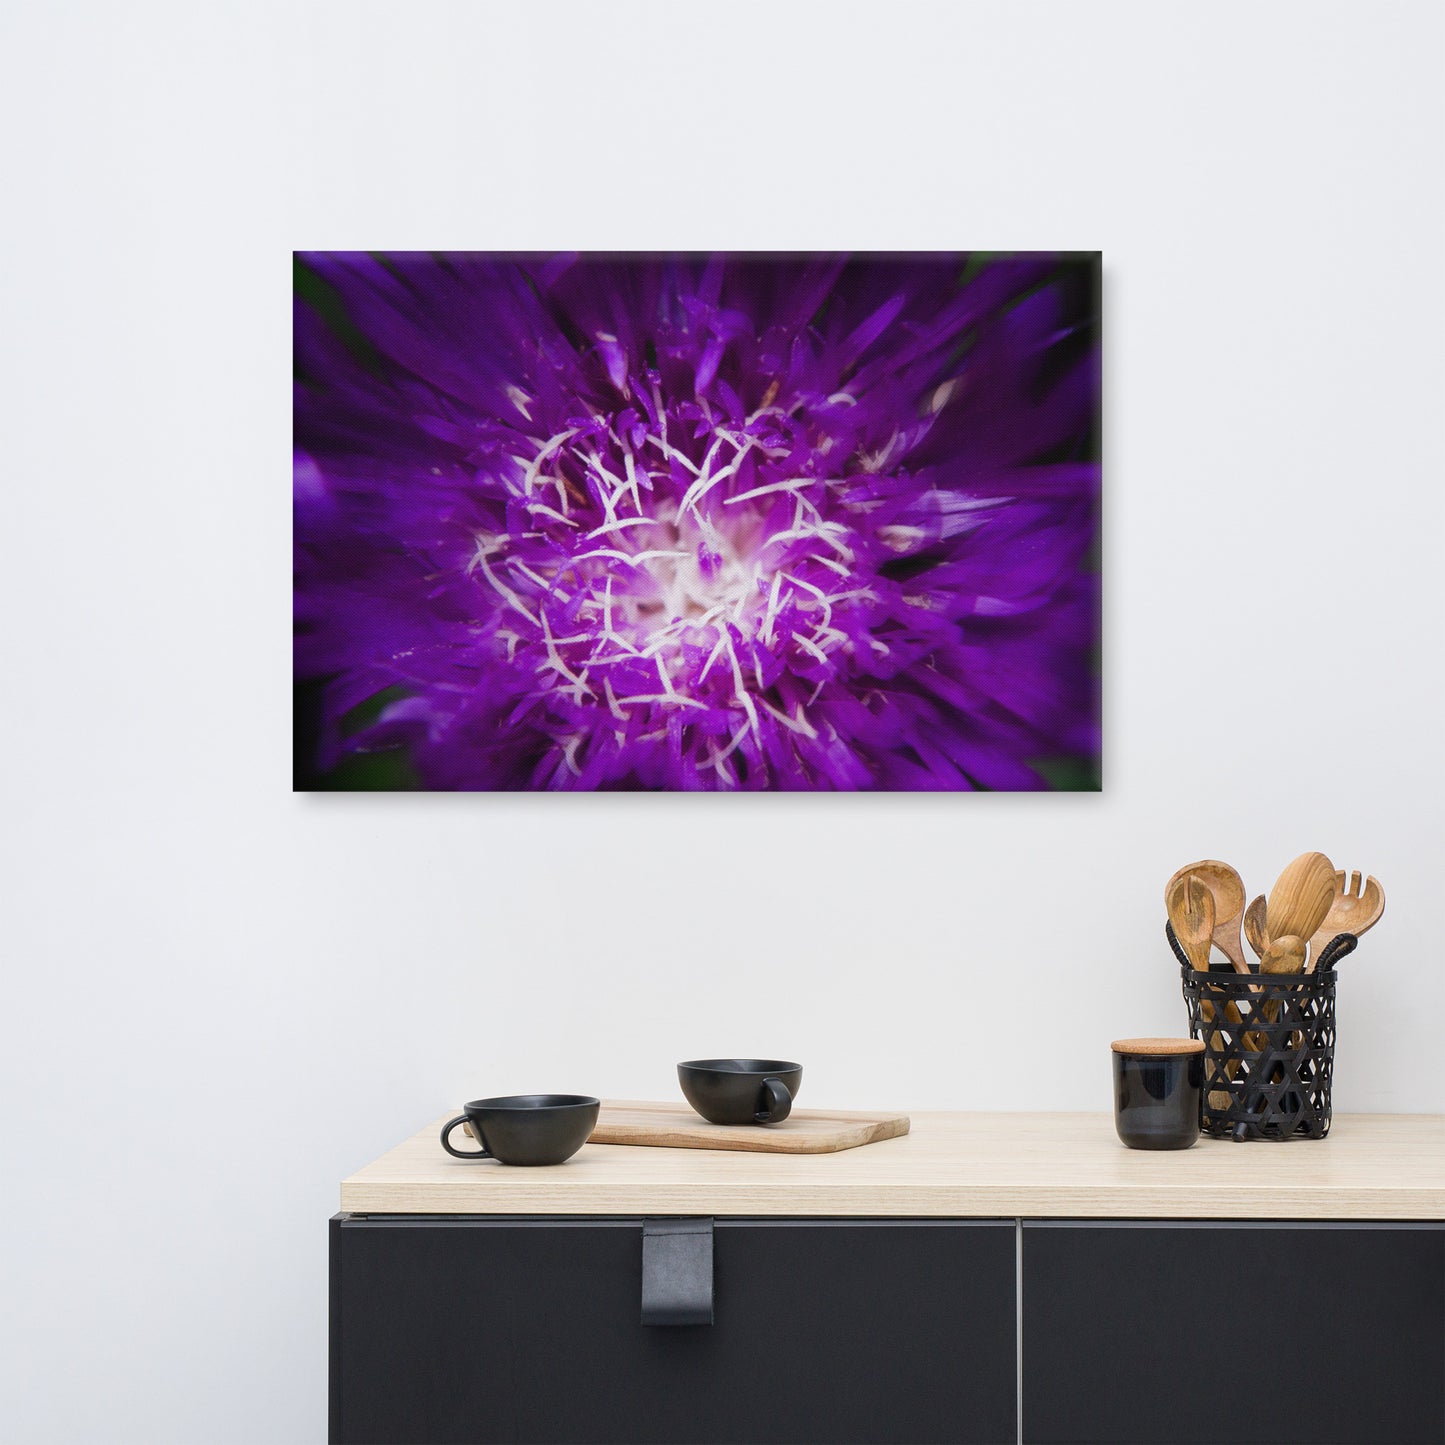 Dining Room Canvas Art Ideas: Dark Purple and White Aster Bloom Close-up Botanical / Floral / Flora / Flowers / Nature Photograph Canvas Wall Art Print - Artwork